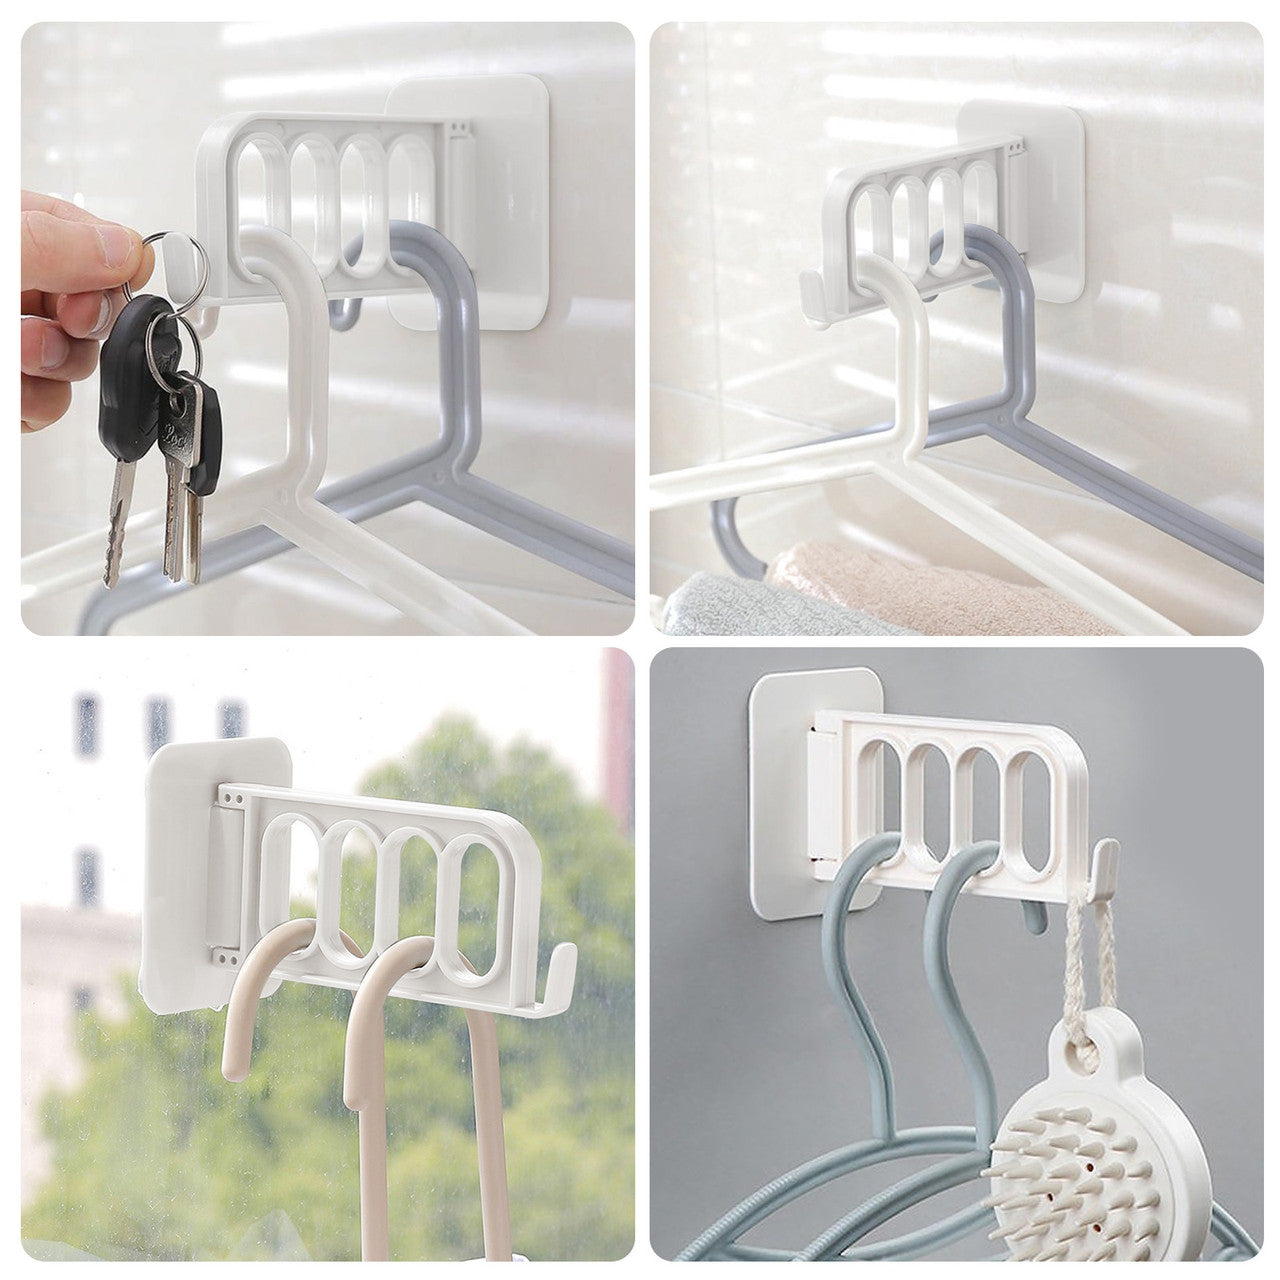 5 Pcs Foldable Wall Hanging Four Hole Hanger - For Kitchen and Bedroom Door Hookno Hole Punching No Trace Installation (White)